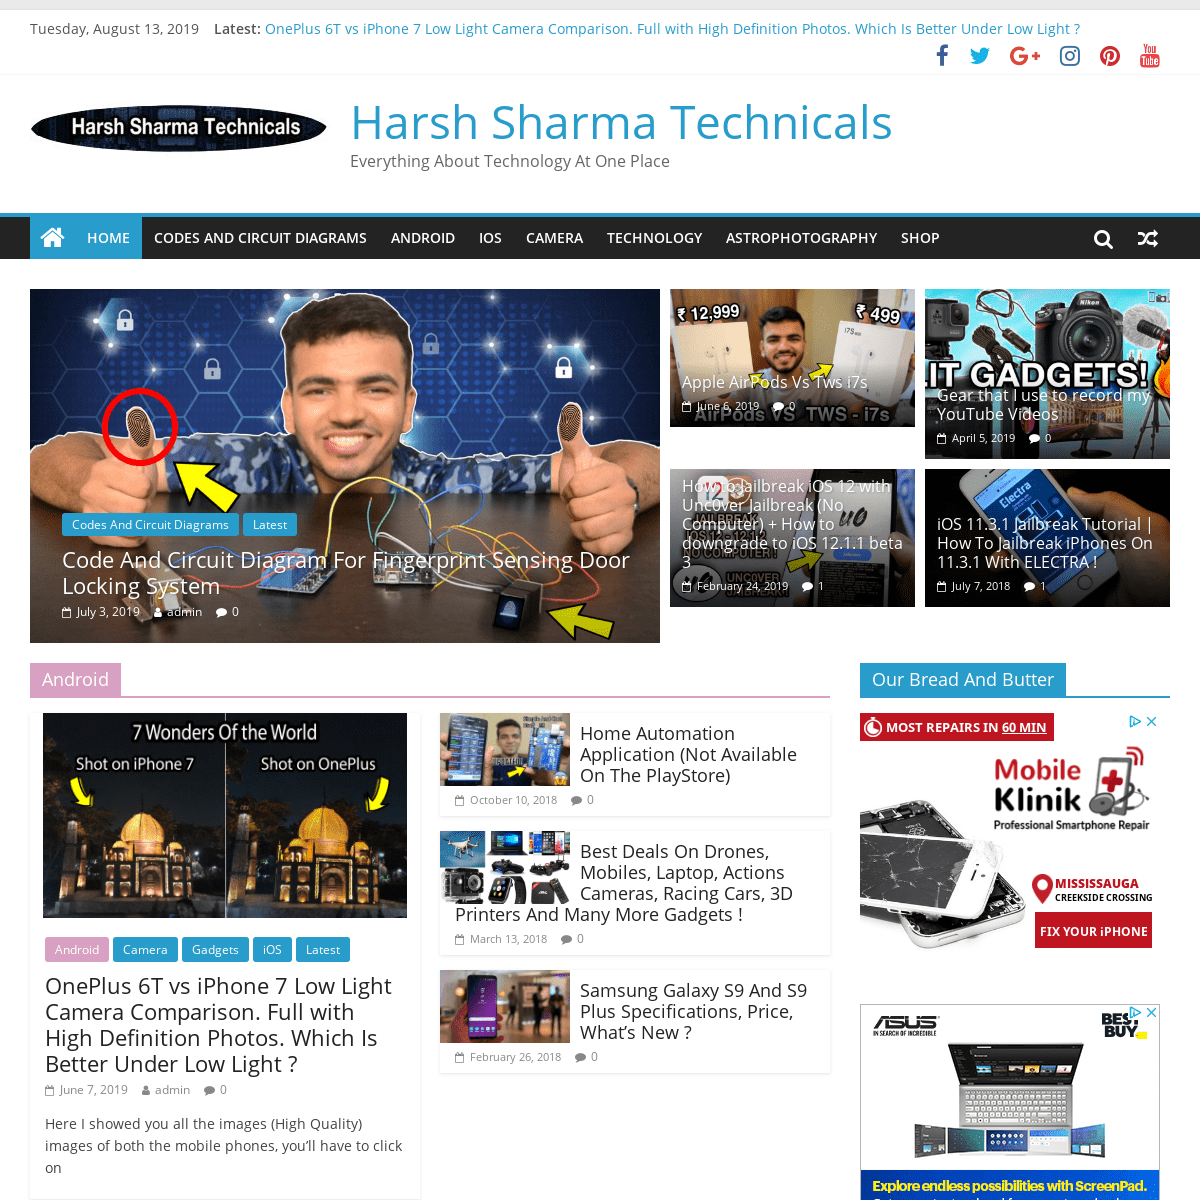 Harsh Sharma Technicals – Everything About Technology At One Place